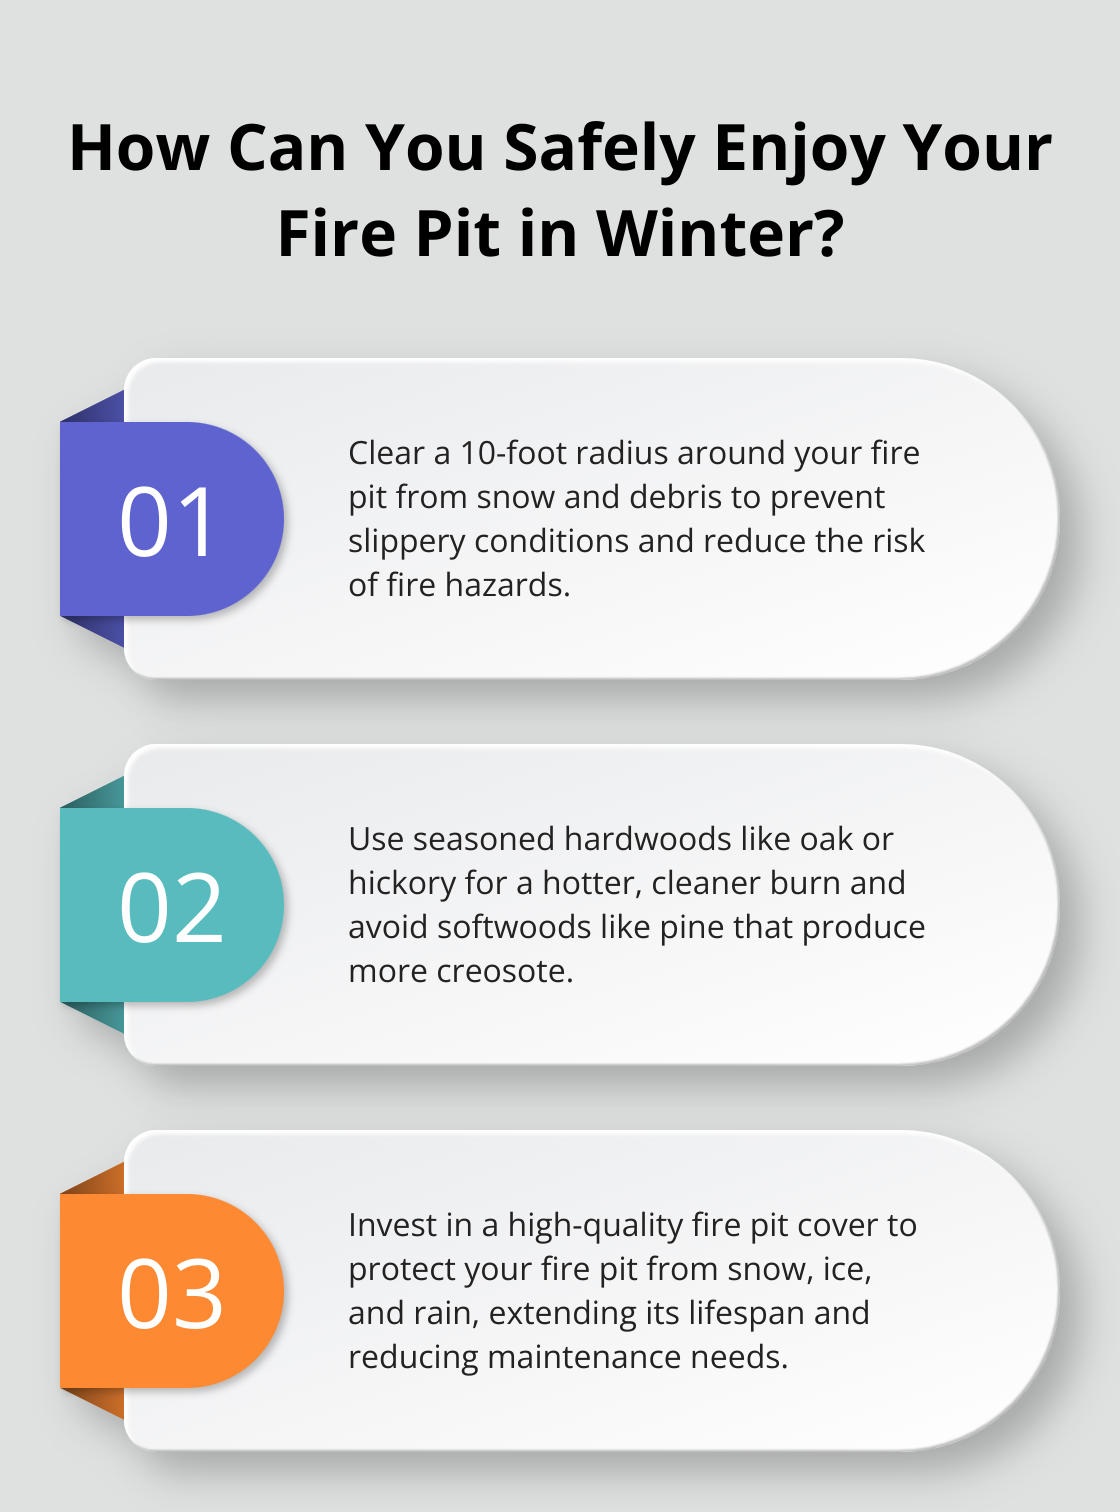 Fact - How Can You Safely Enjoy Your Fire Pit in Winter?